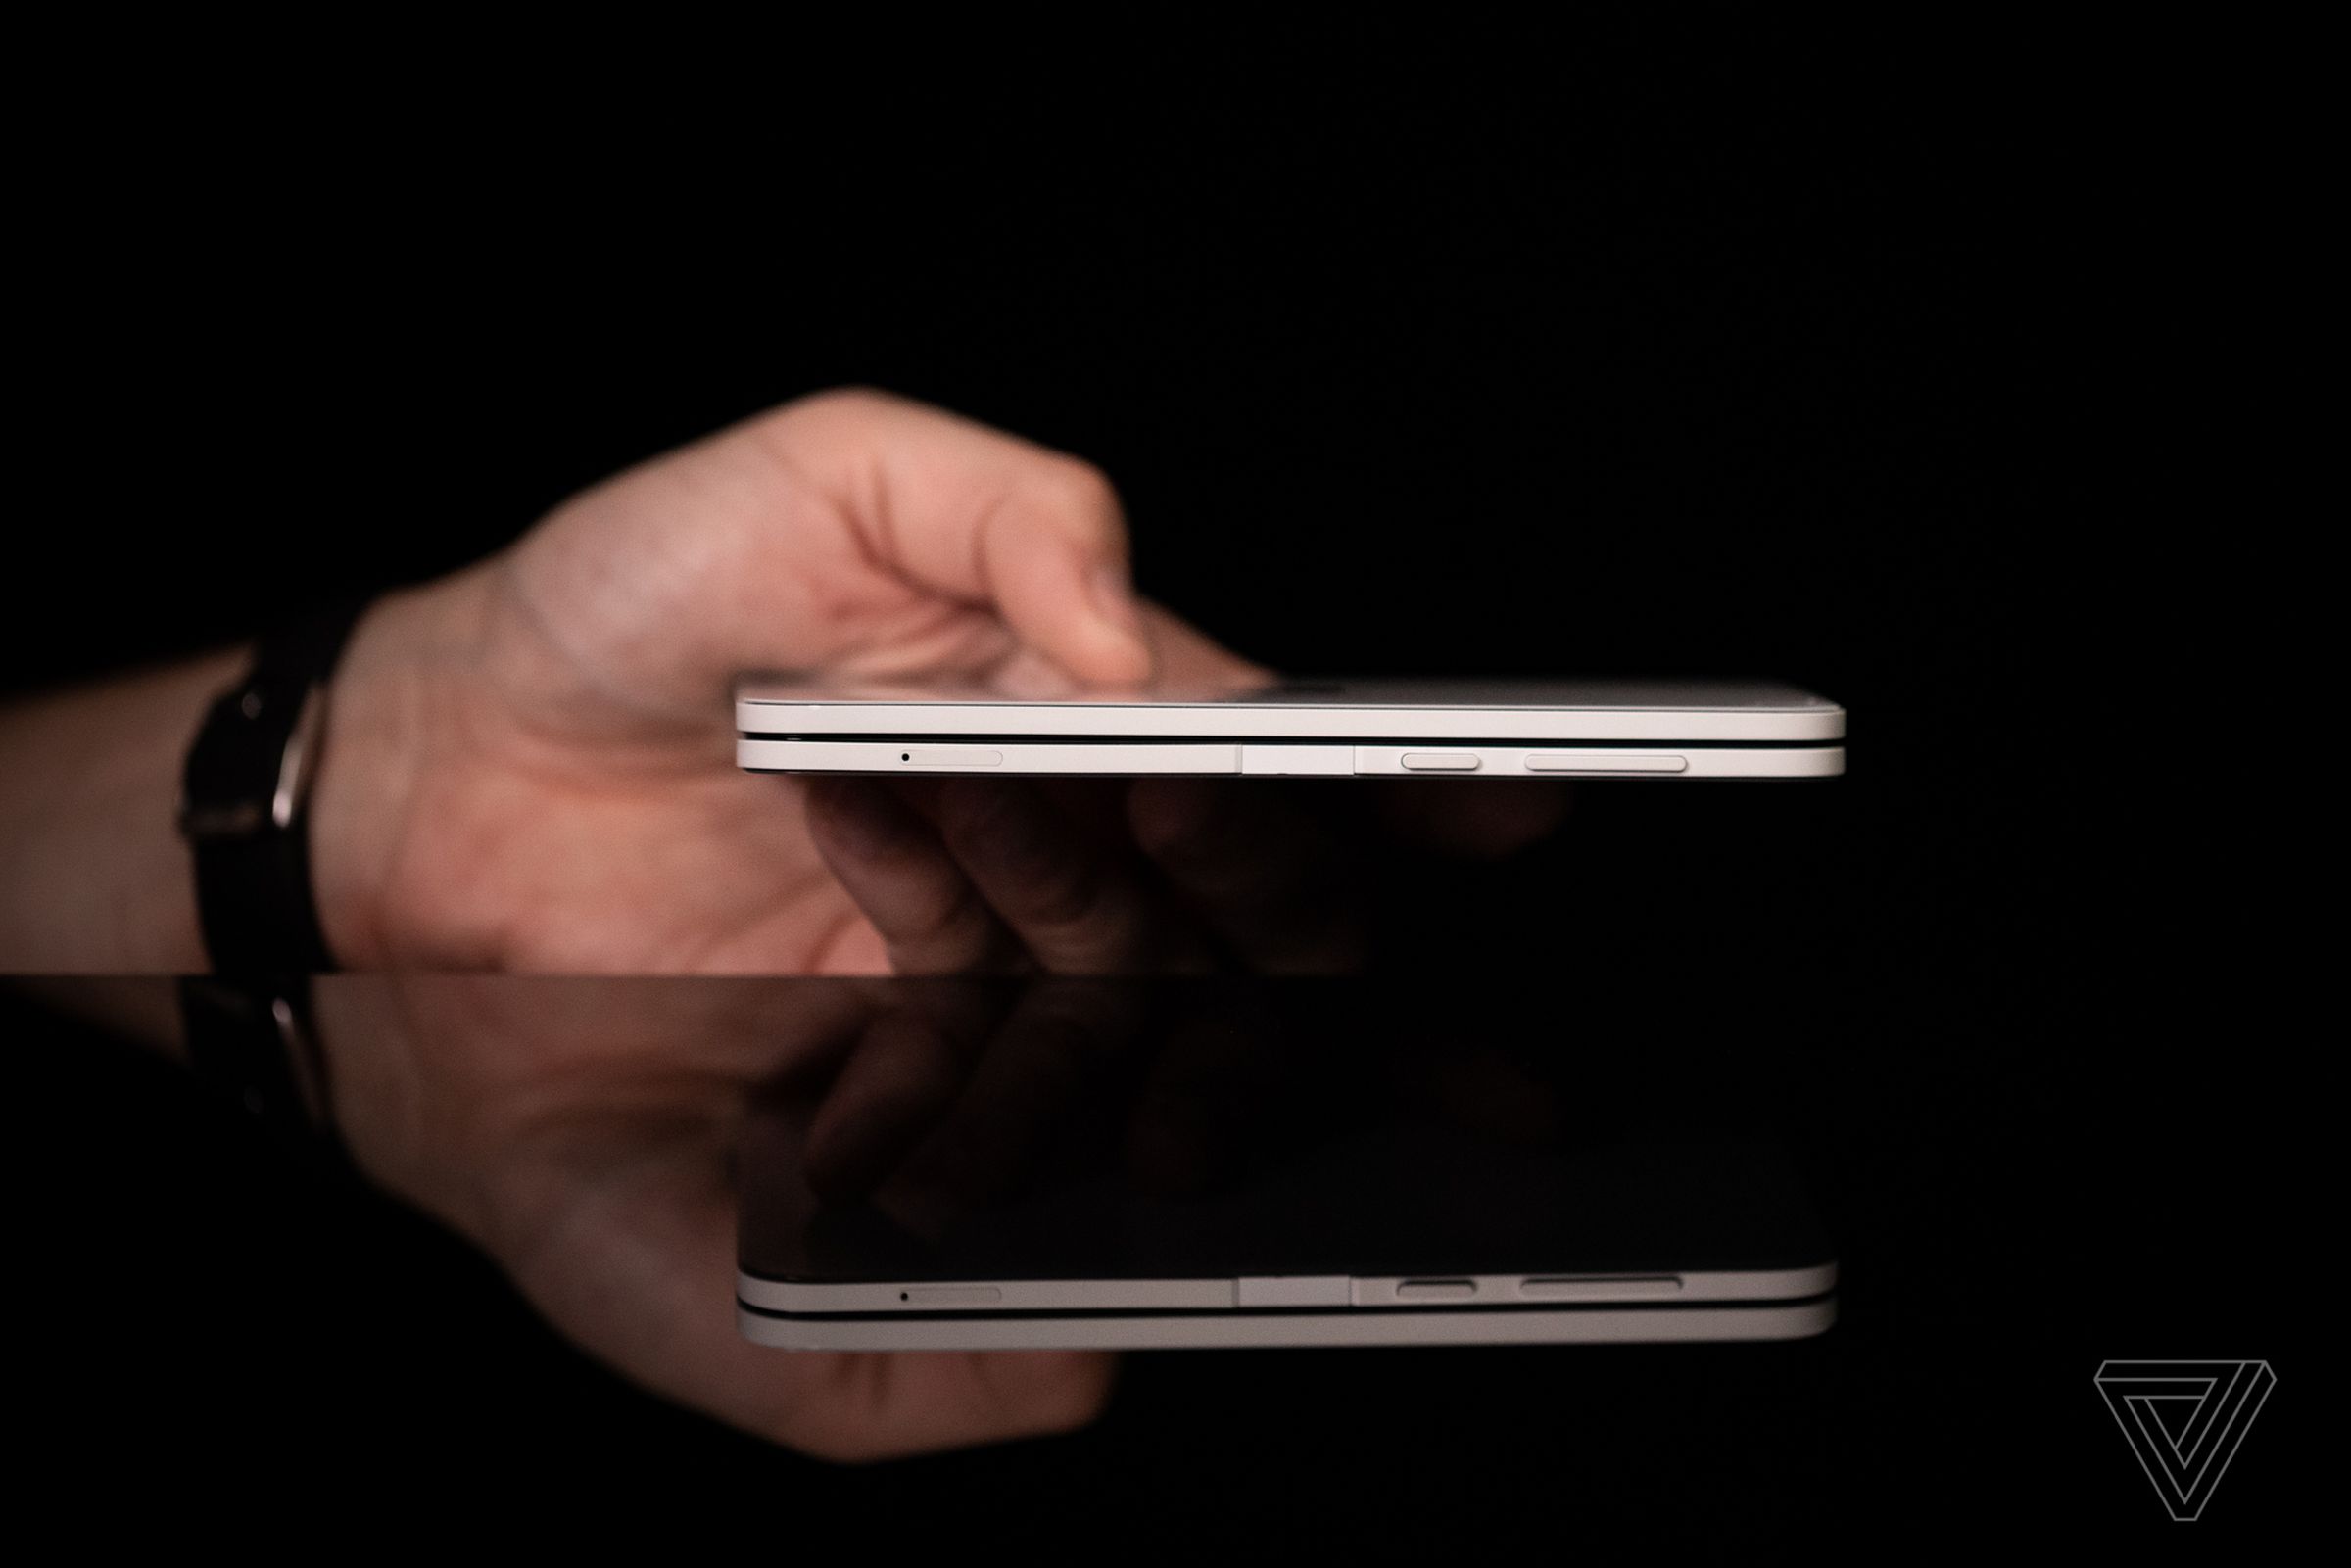 When closed, the Surface Duo is less than 10mm thick